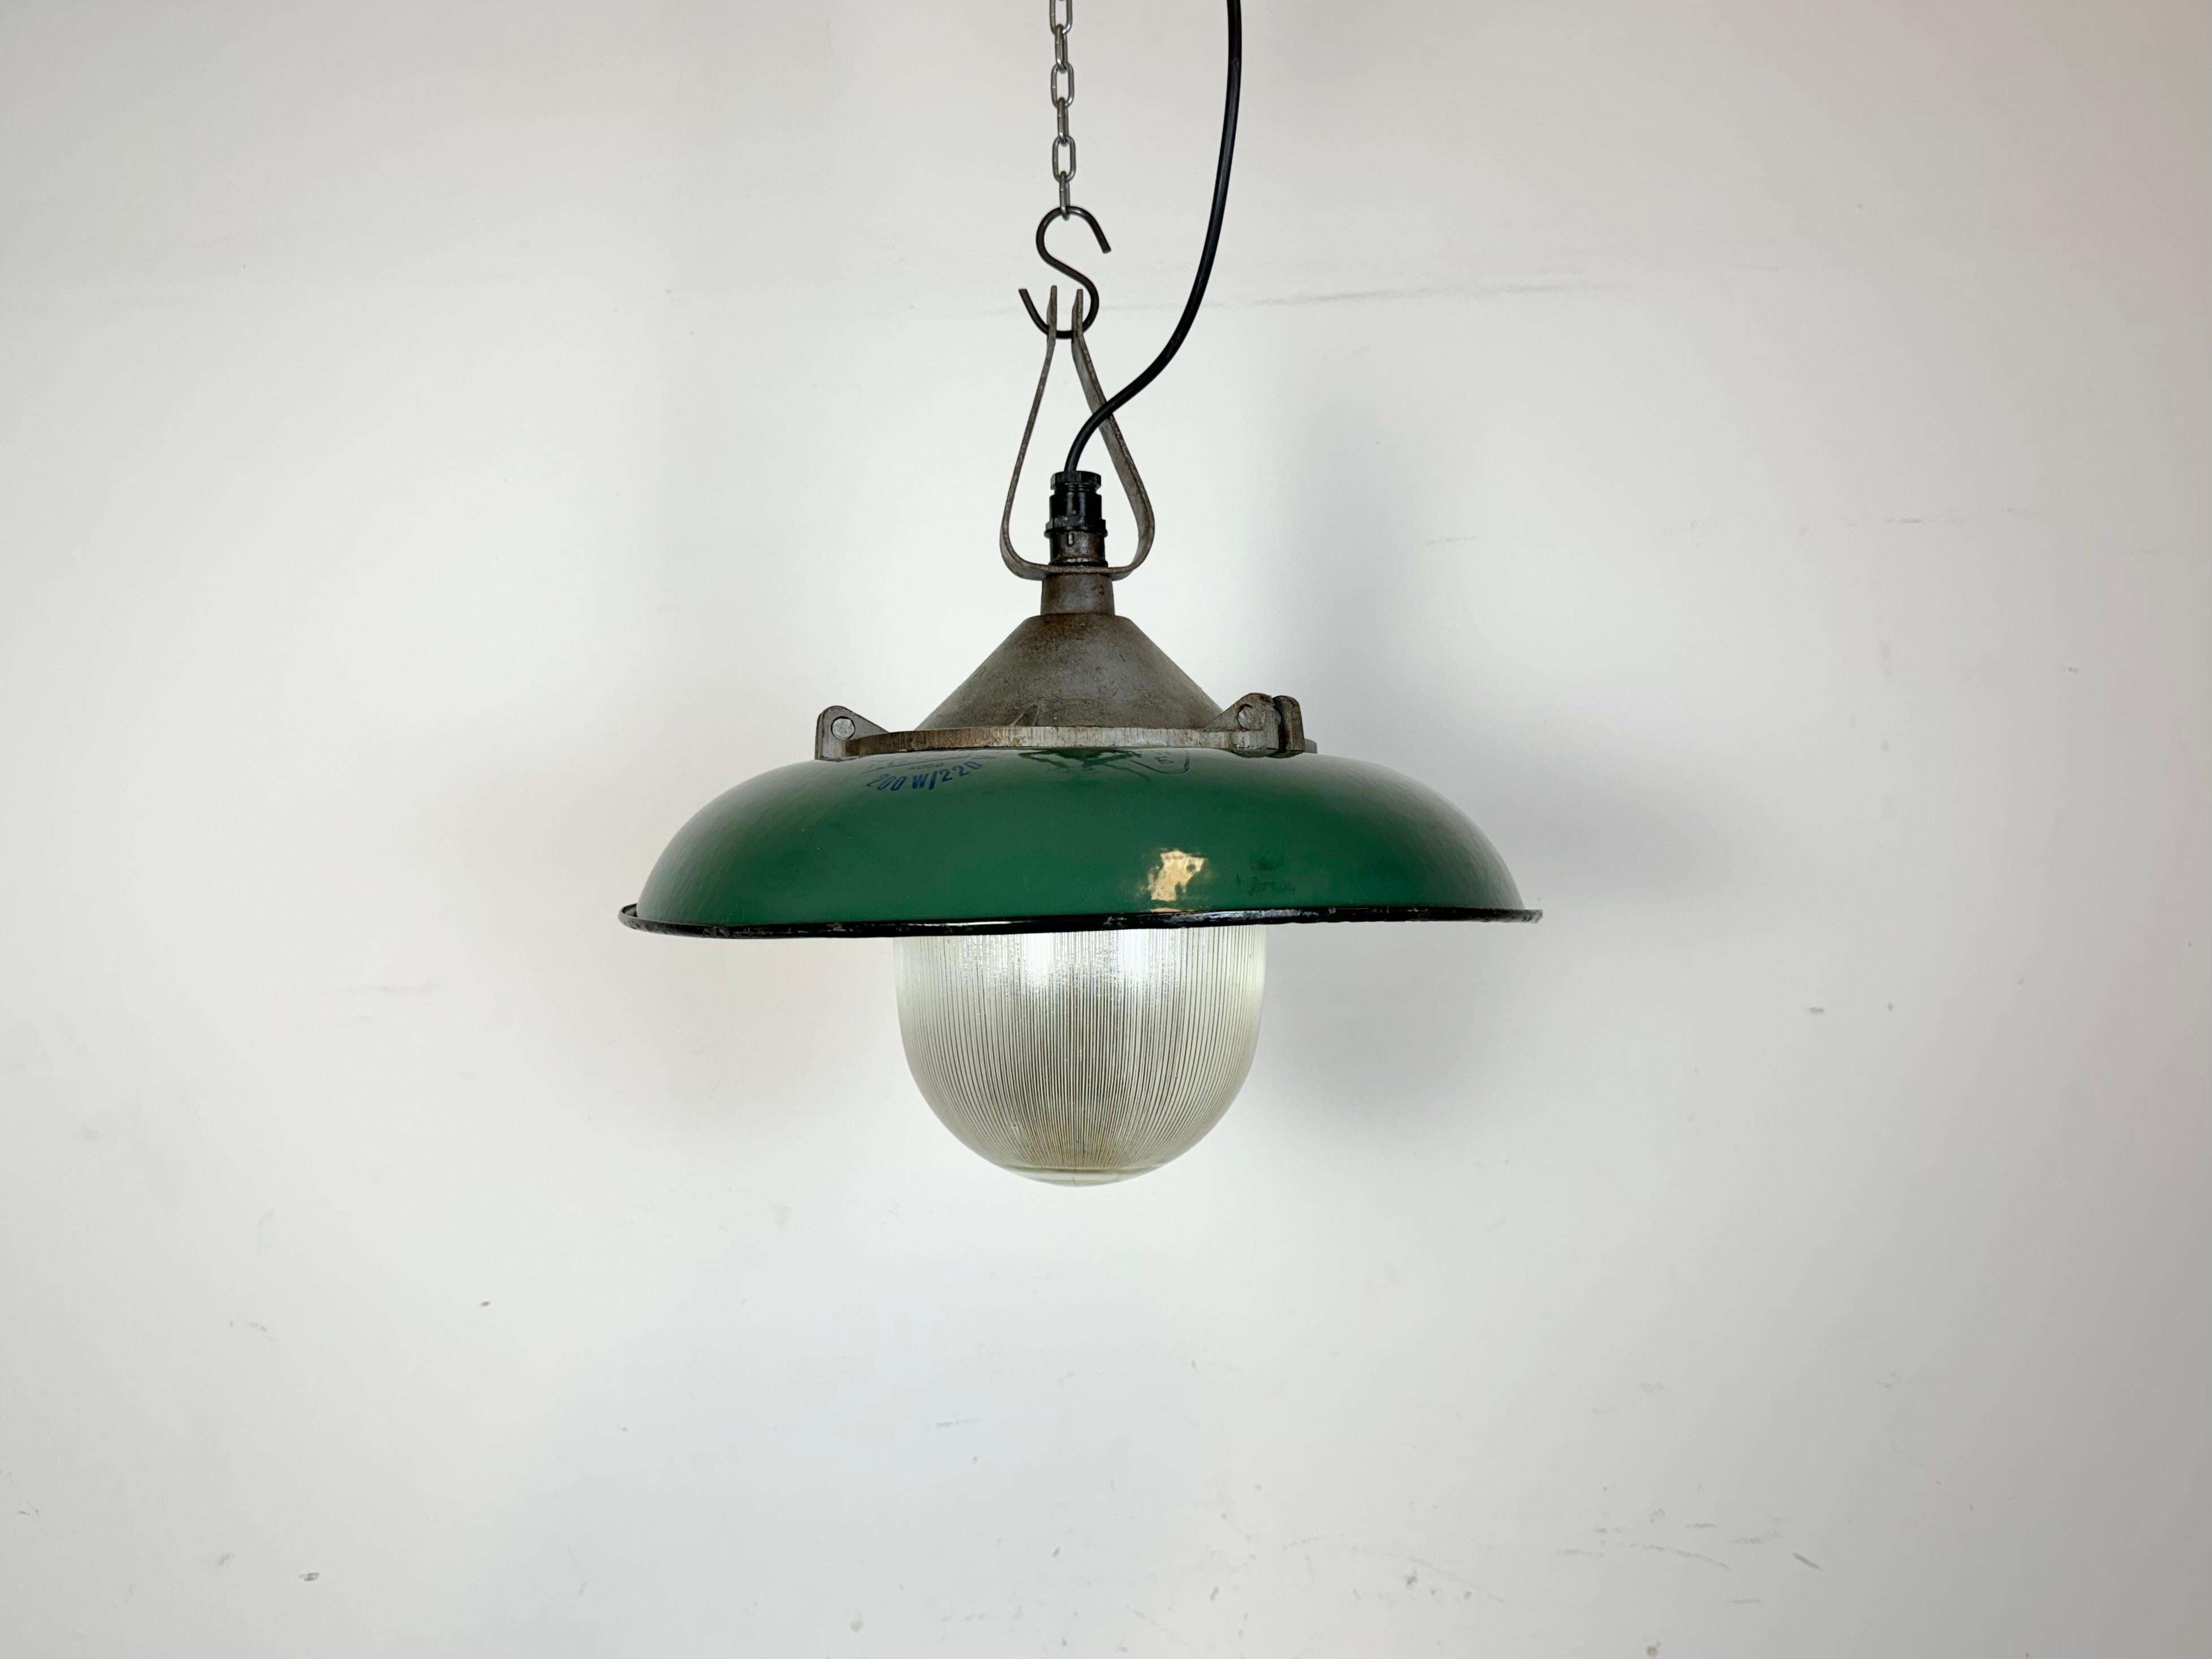 - Industrial factory pendant lamp in cast iron.
- Manufactured by A23 Factory in Wilkasy  in Poland during the 1960s.
- Green enamel shade with white enamel interior.
- Holophane glass cover.
- Weight: 6 kg.
- New wire.
- Socket requires standard